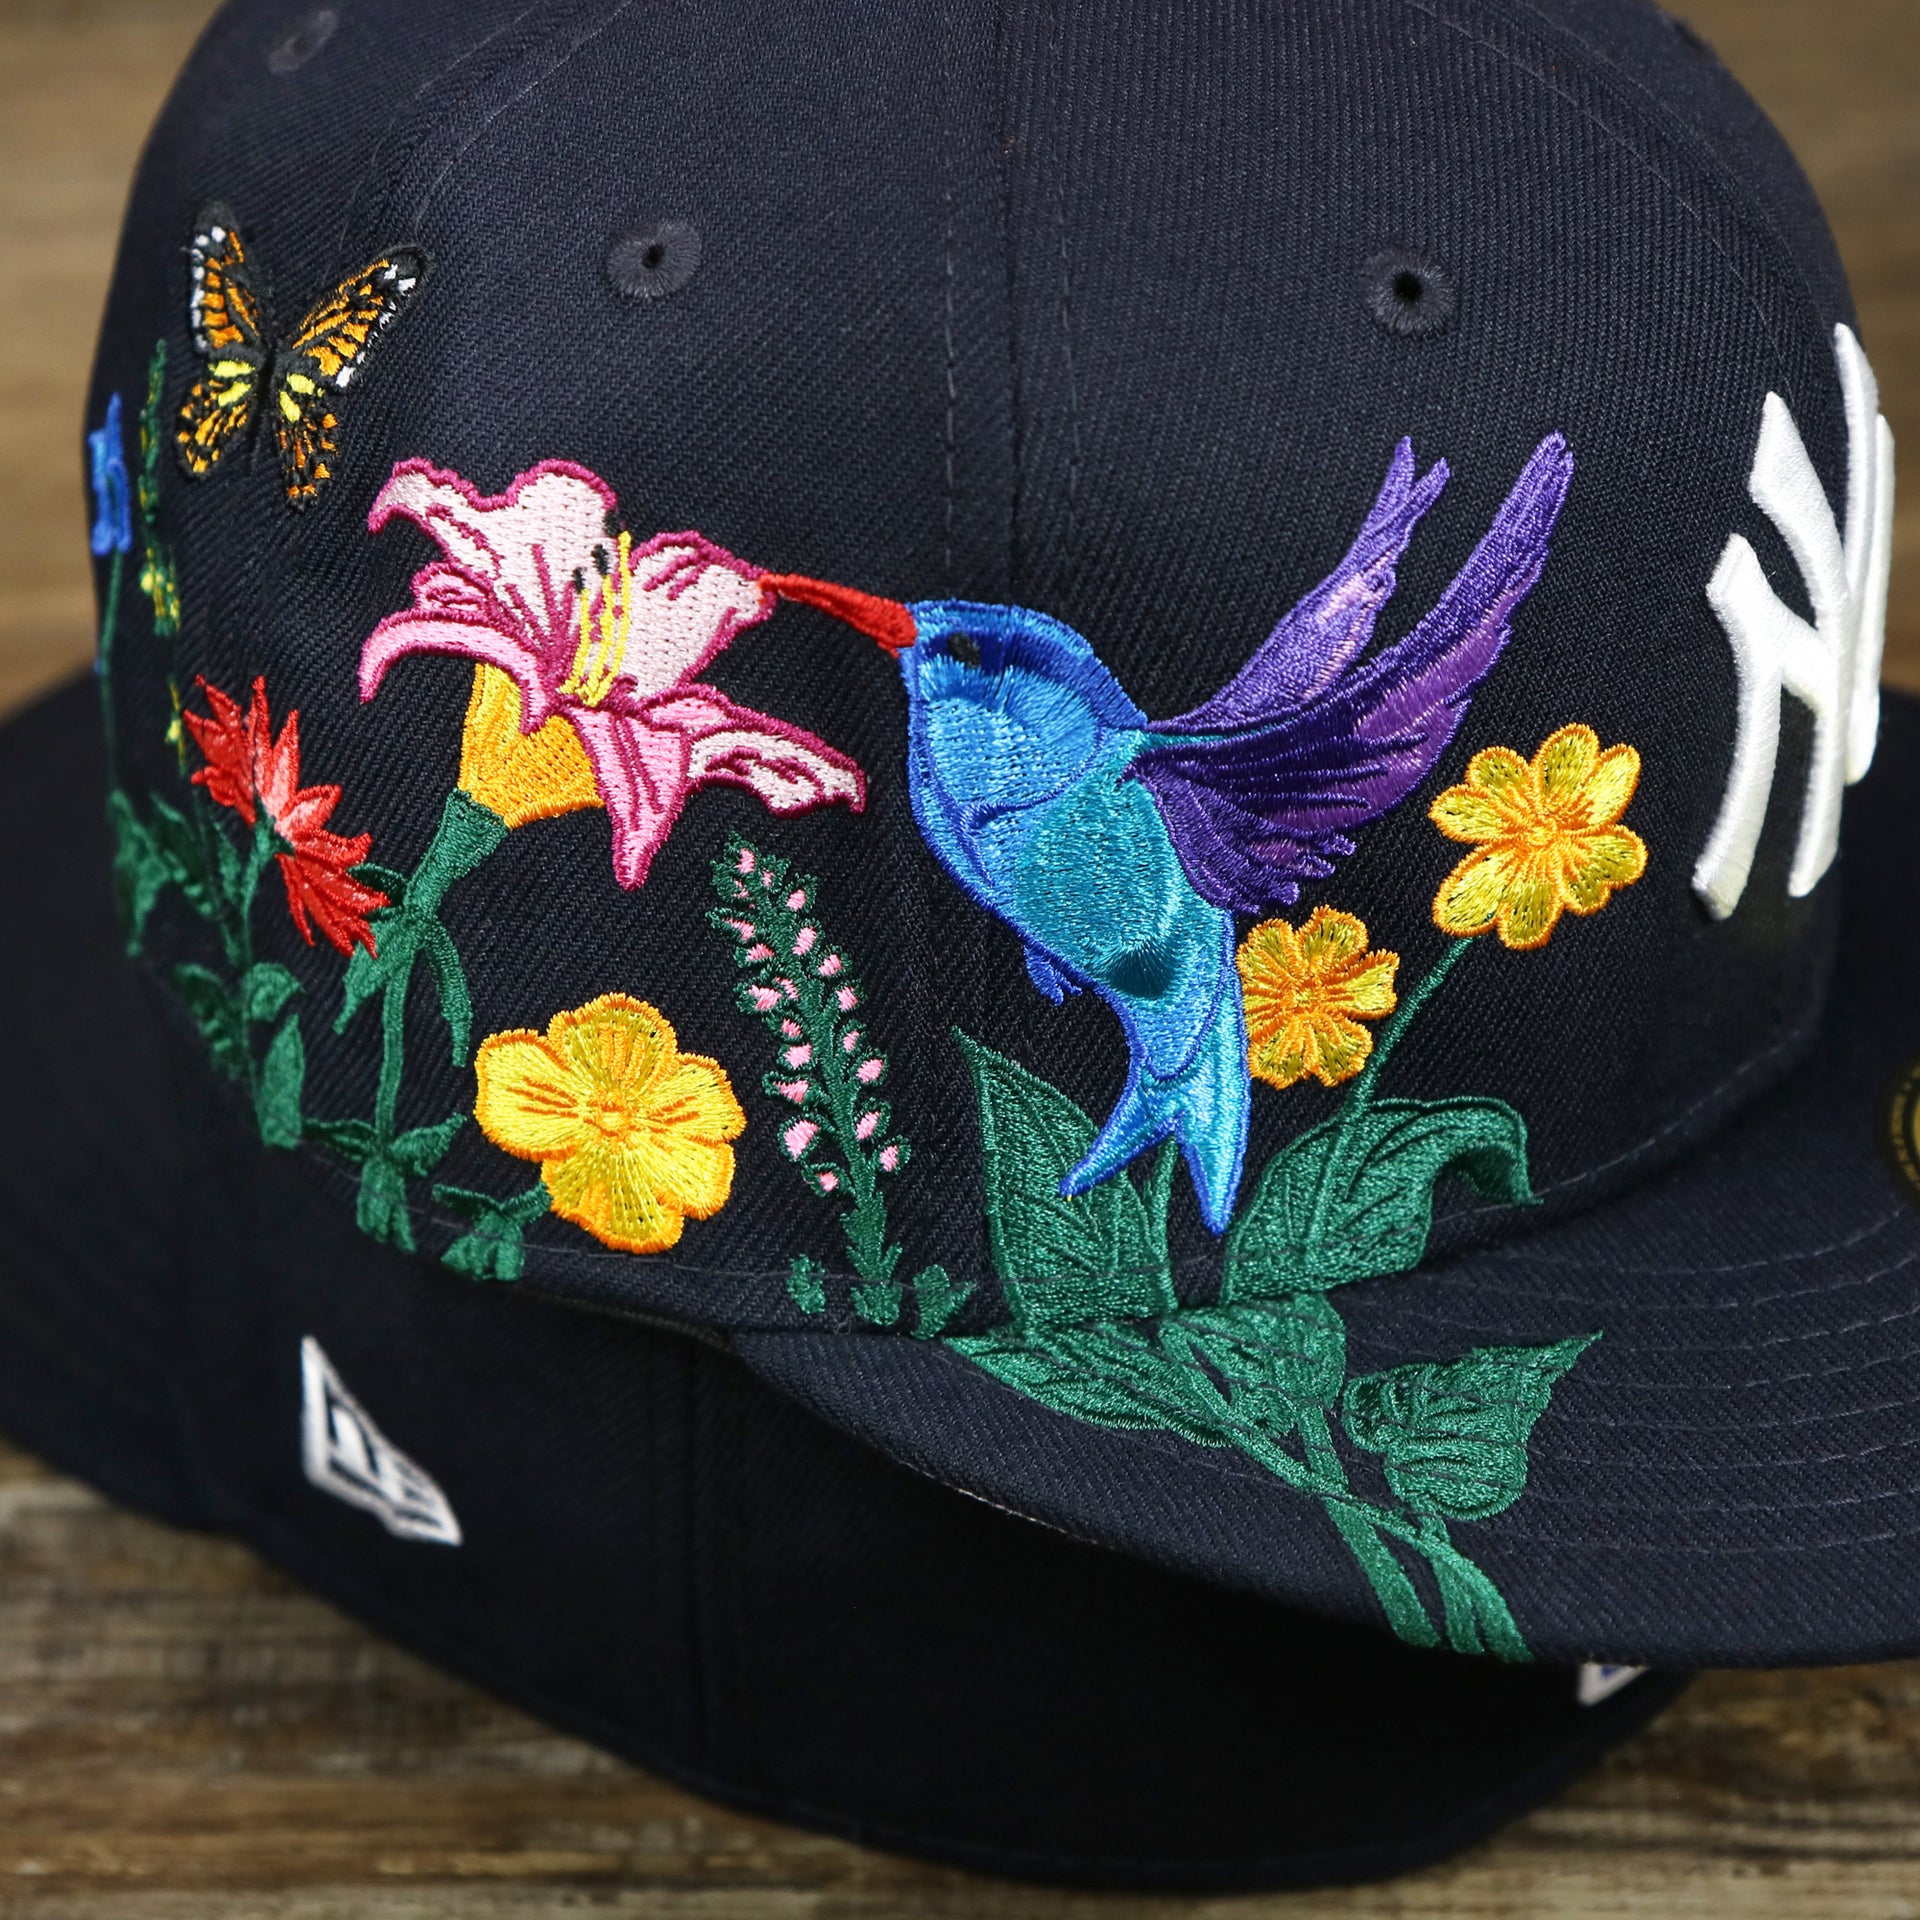 The Bloom Embroidery on the New York Yankees Gray Bottom Bloom Spring Embroidery 59Fifty Fitted Cap | Navy Blue 59Fifty Cap